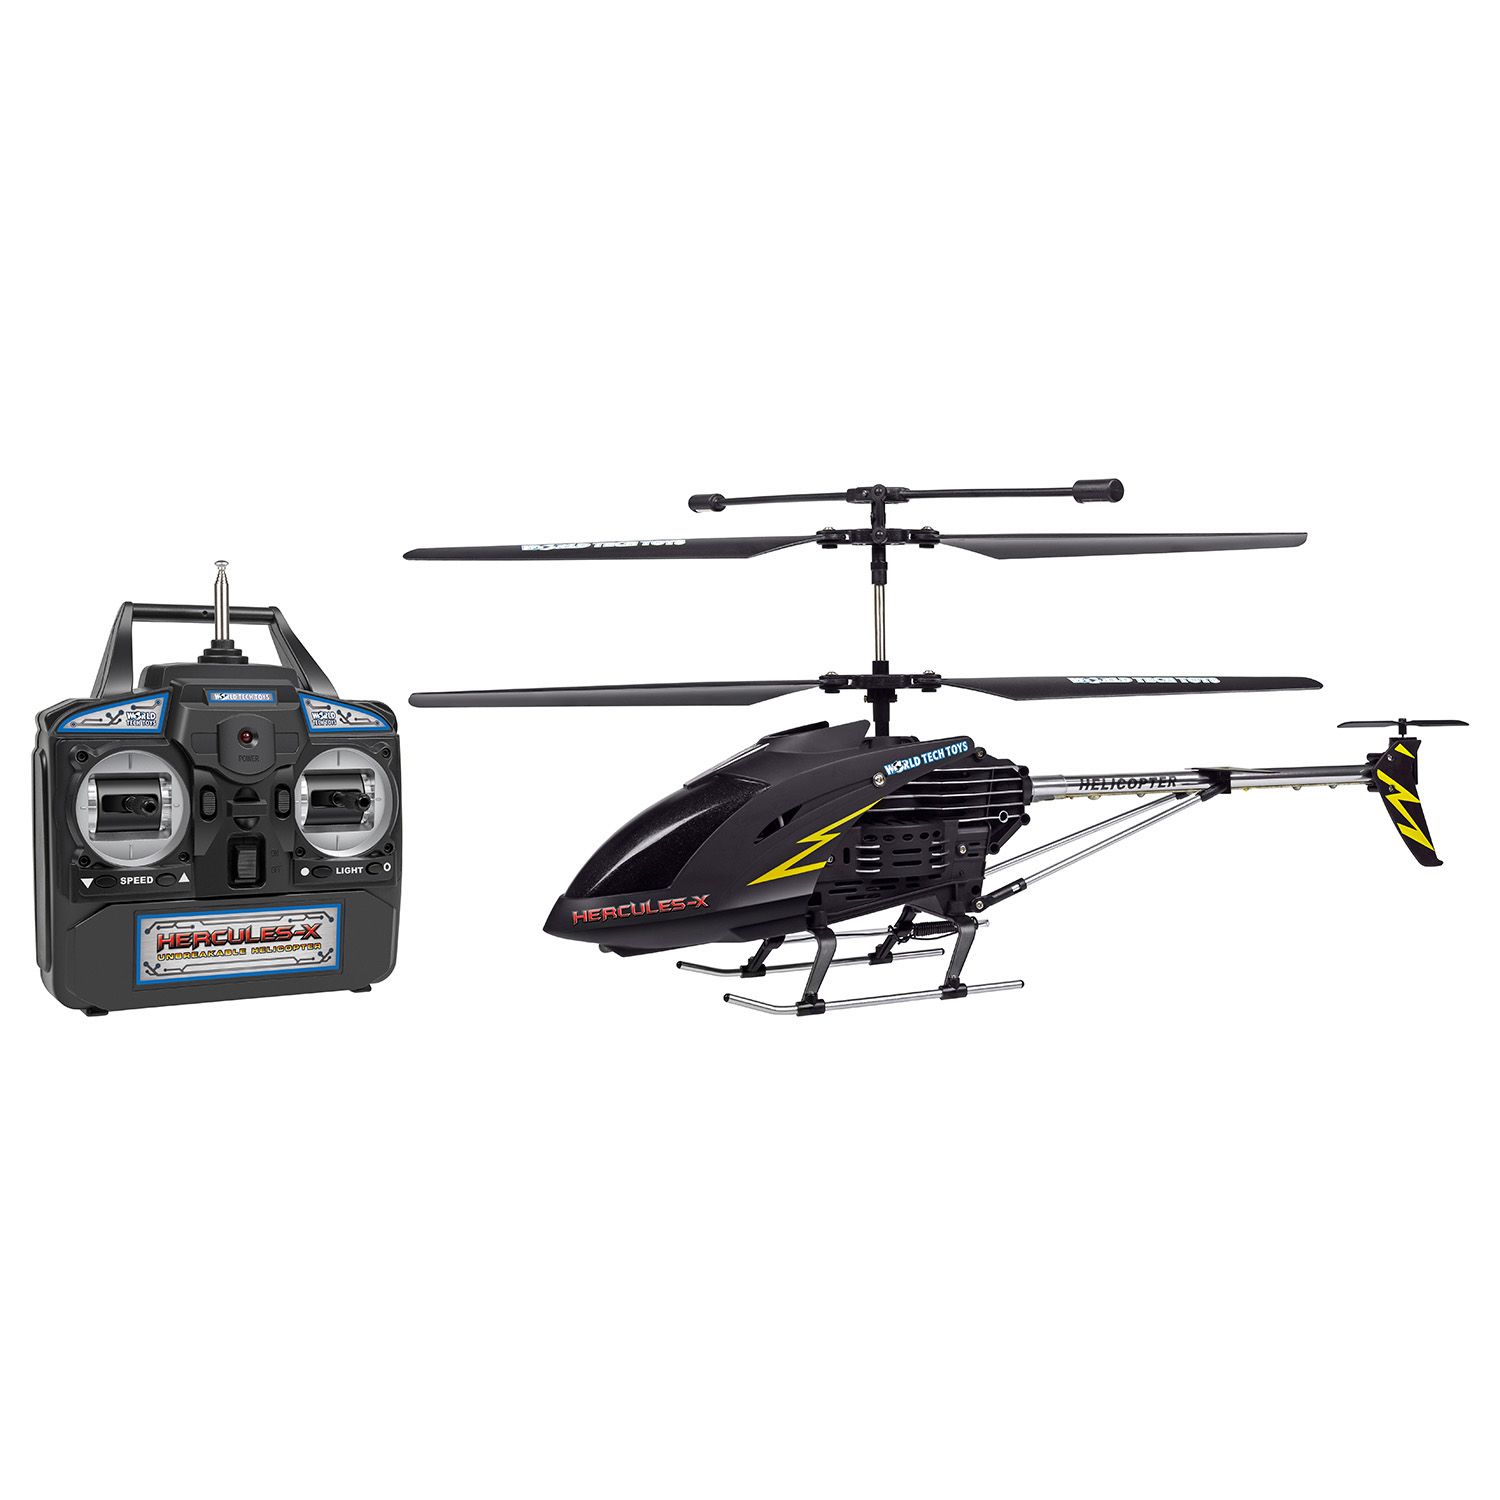 x series helicopter